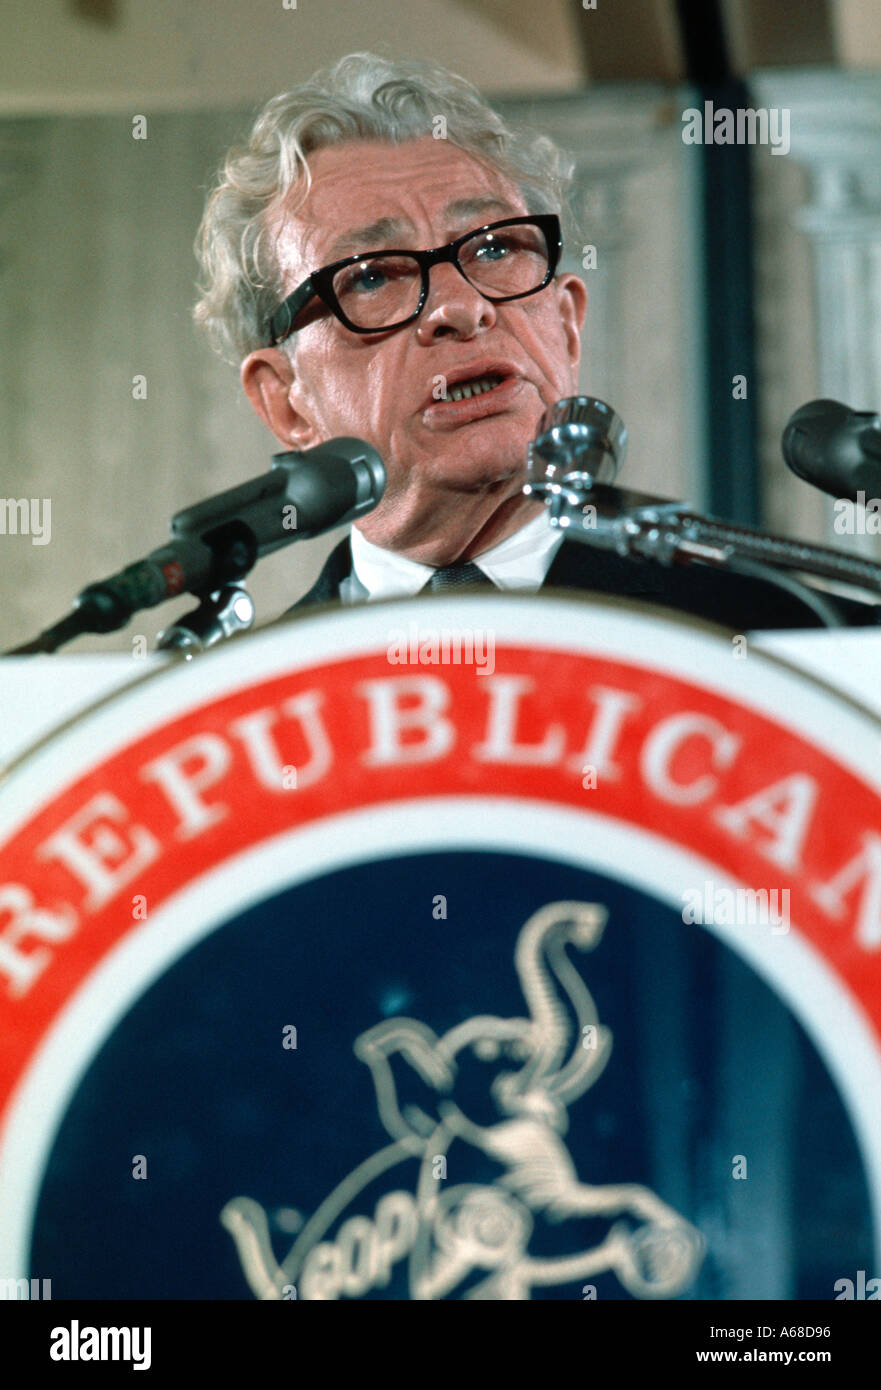 Tennessee Republican Senator Everett Dirksen giving one of his famous speeches at a political gathering Stock Photo